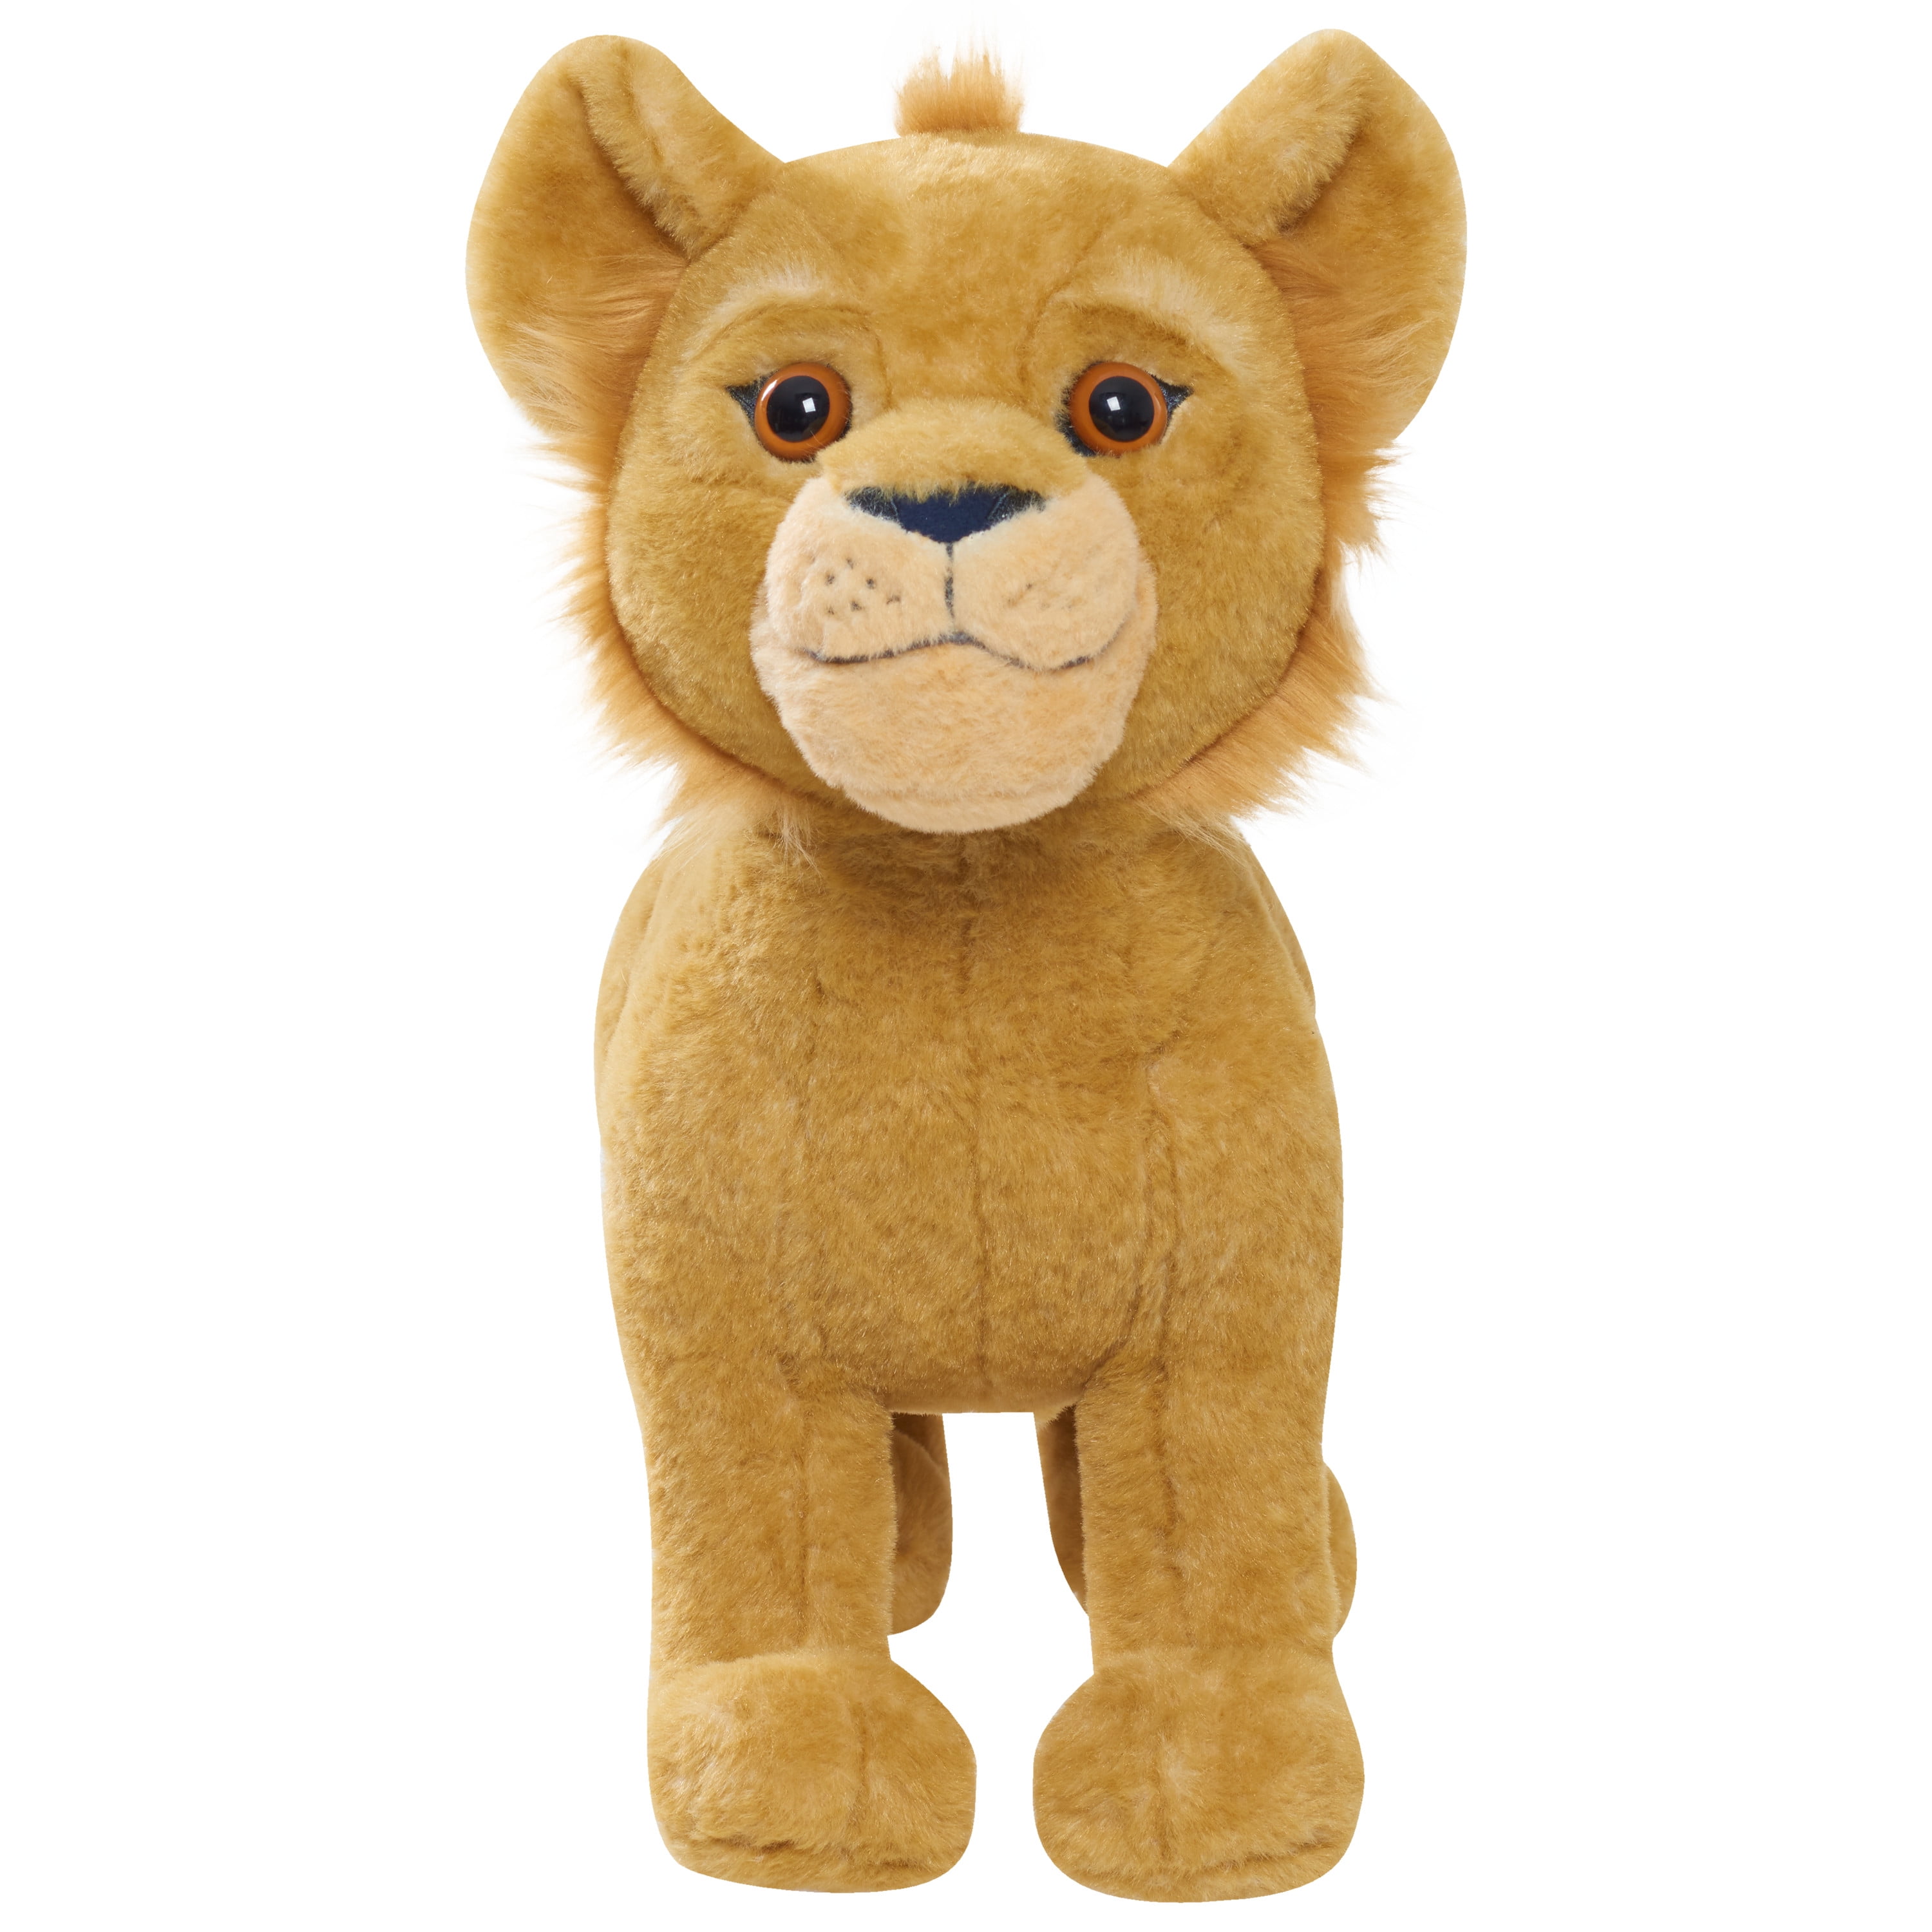 Nala Plush Toy by Just Play 7" Disney's The Lion King 2019 